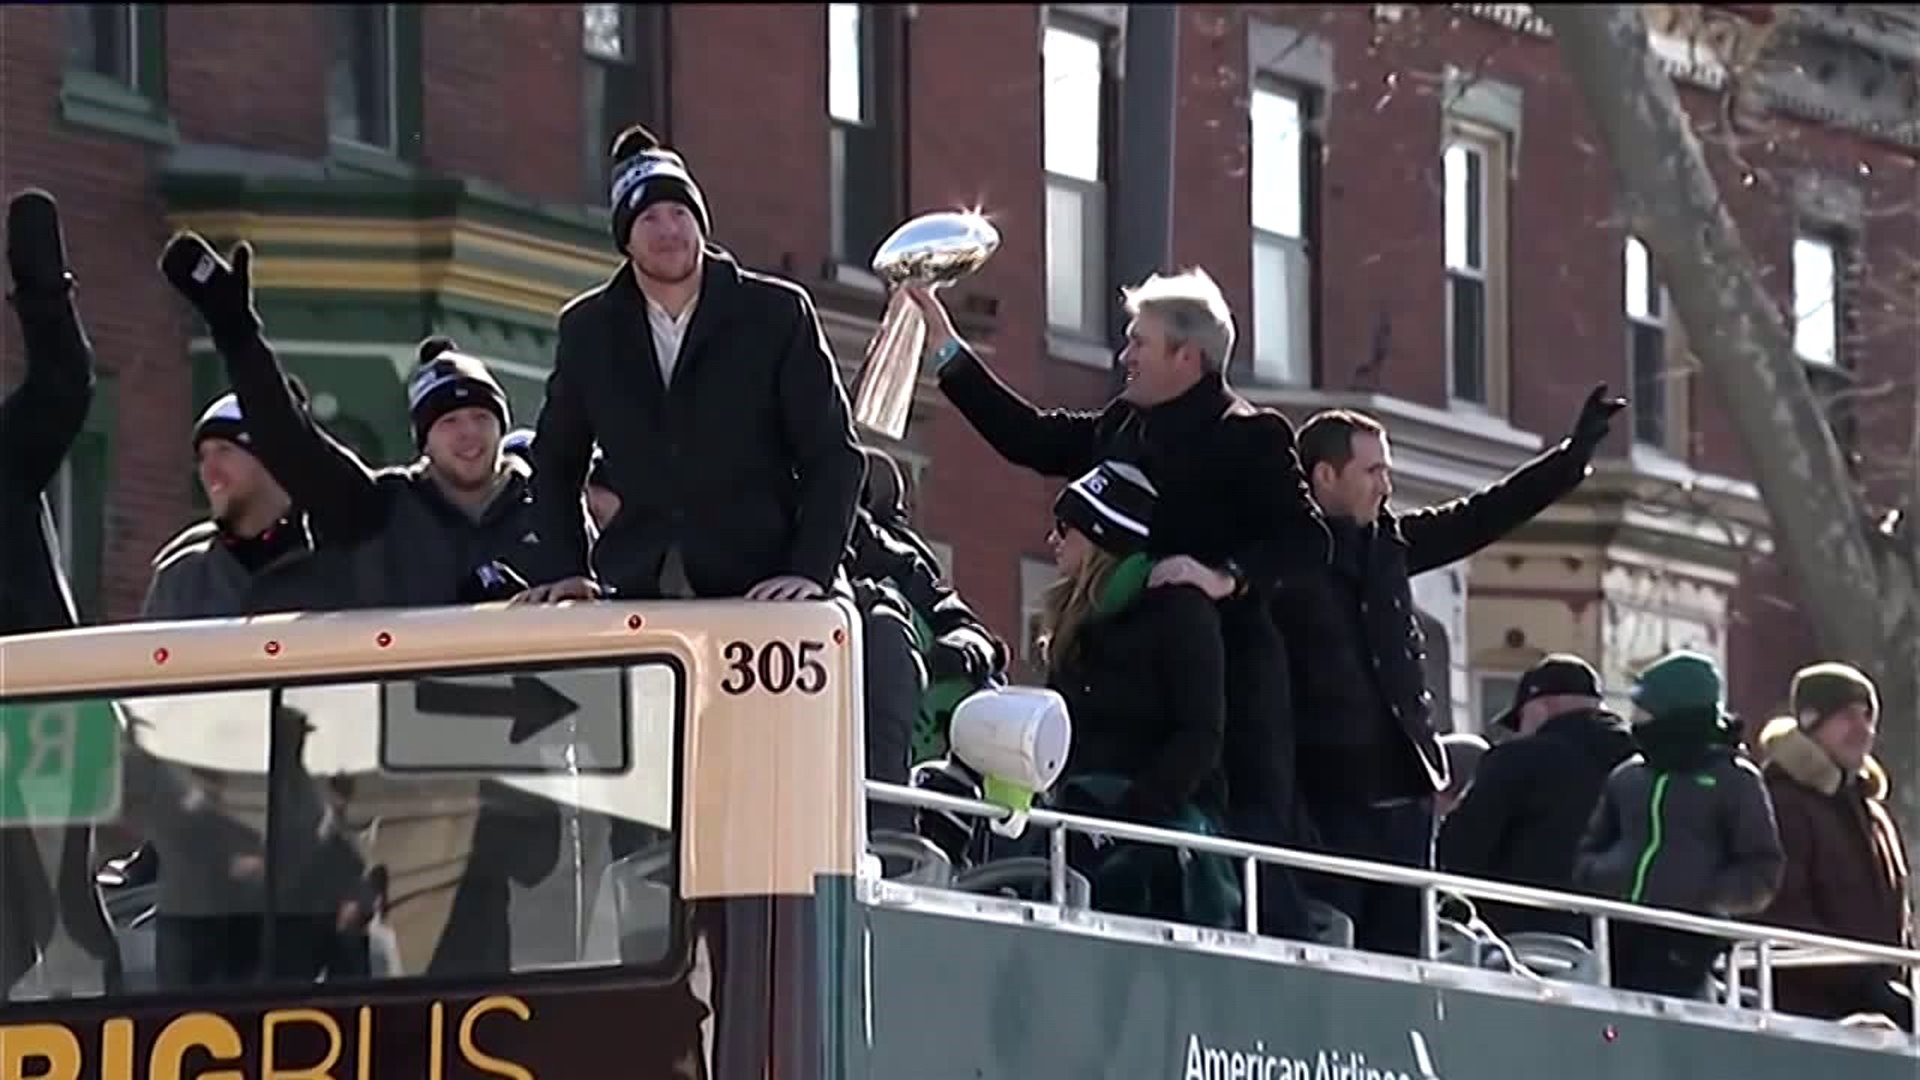 Eagles Fans Return to Northeast PA After Celebrating Parade Day for Super Bowl Champs in Philadelphia